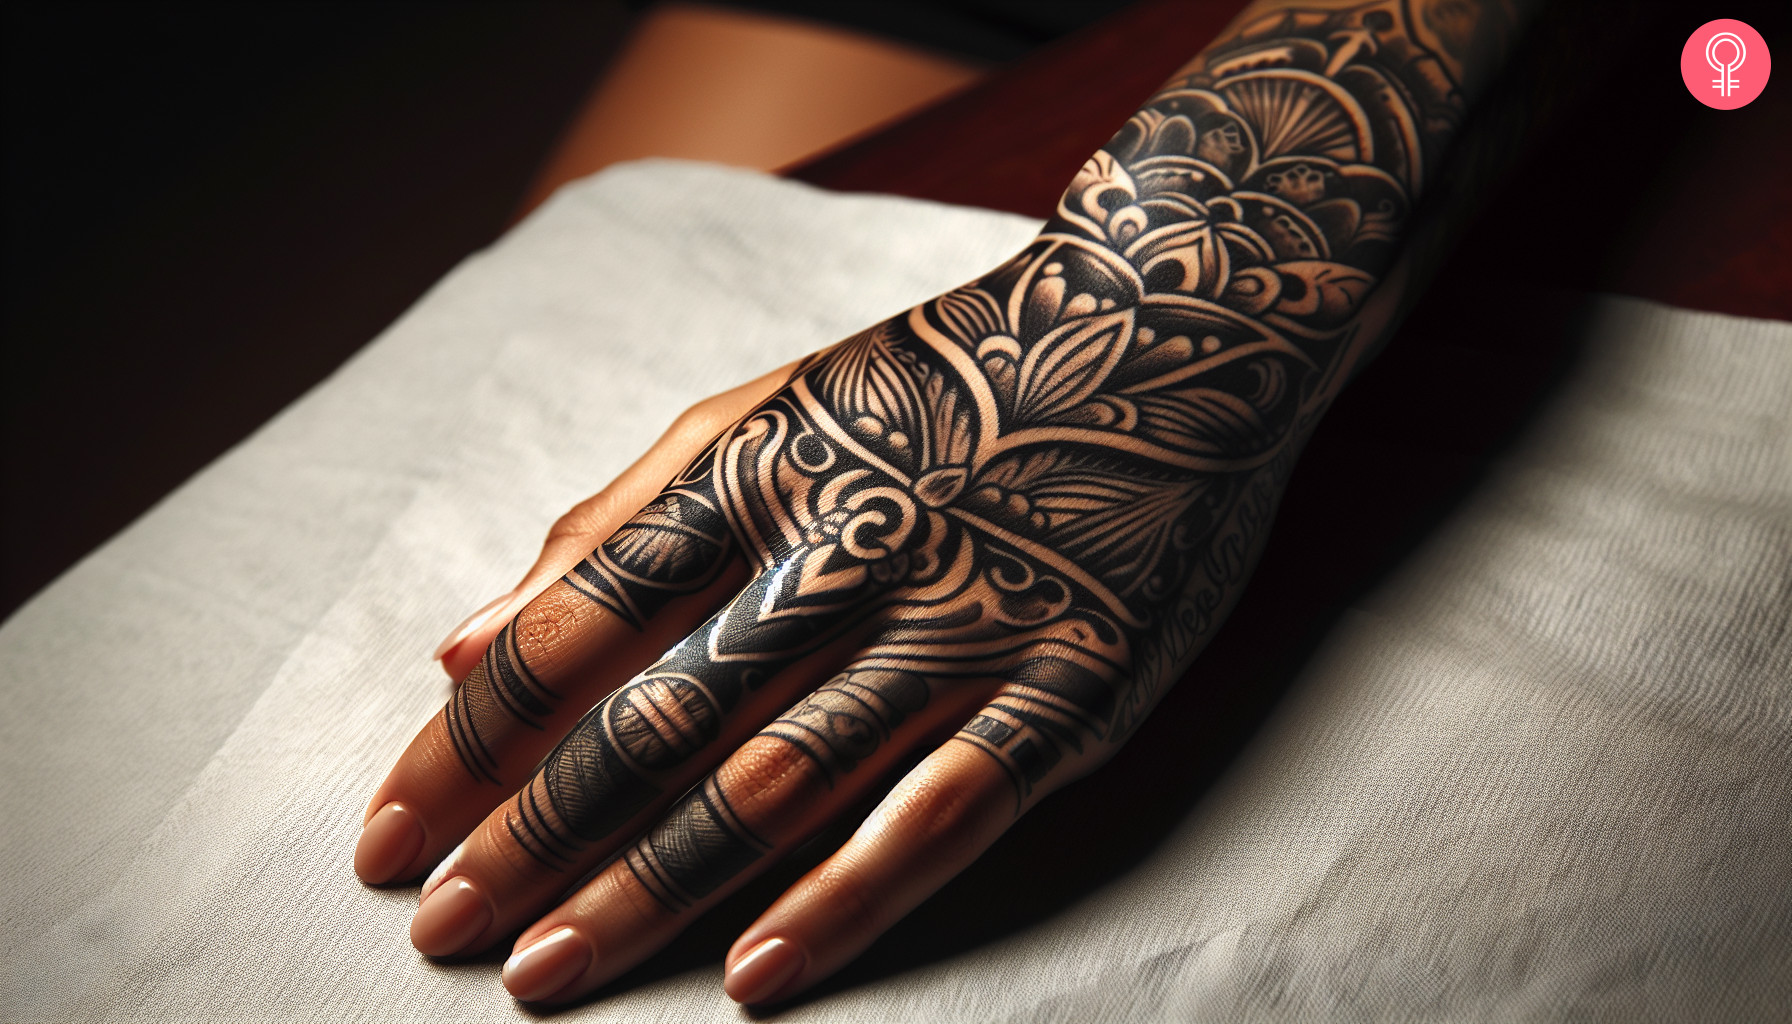 A Chicano tattoo on the hand